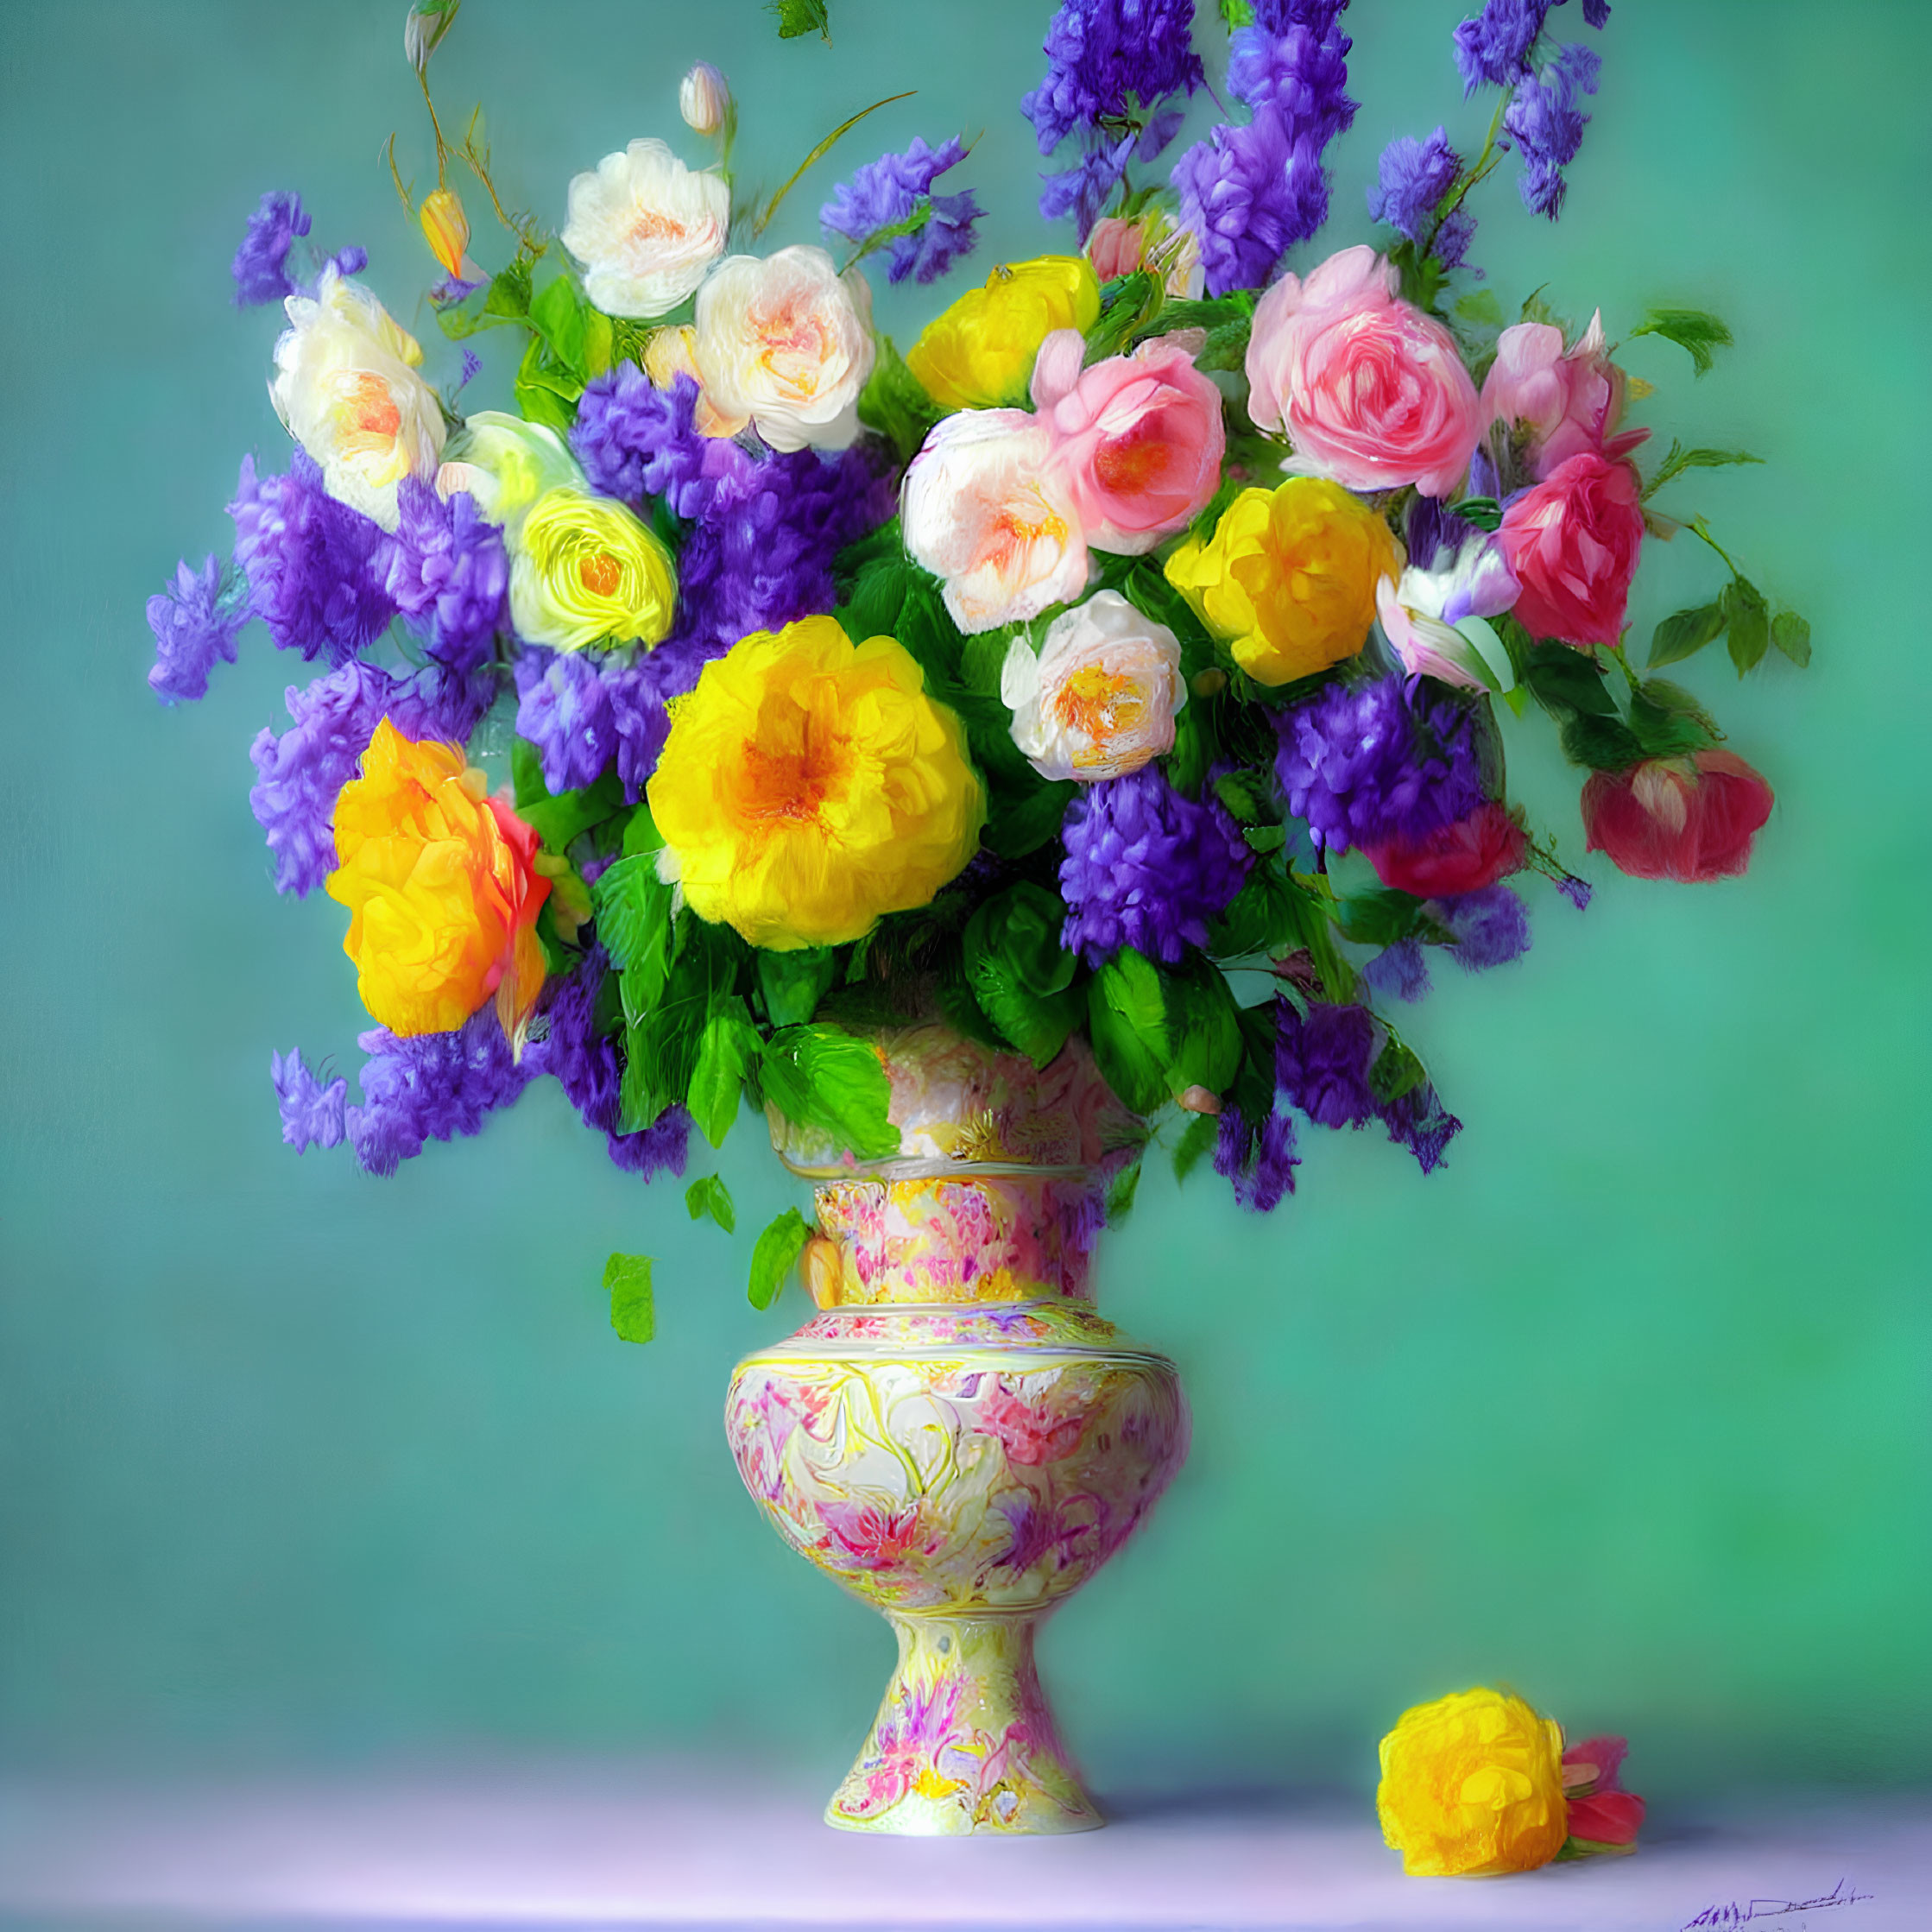 Colorful Flower Bouquet in Ornate Vase on Green Background